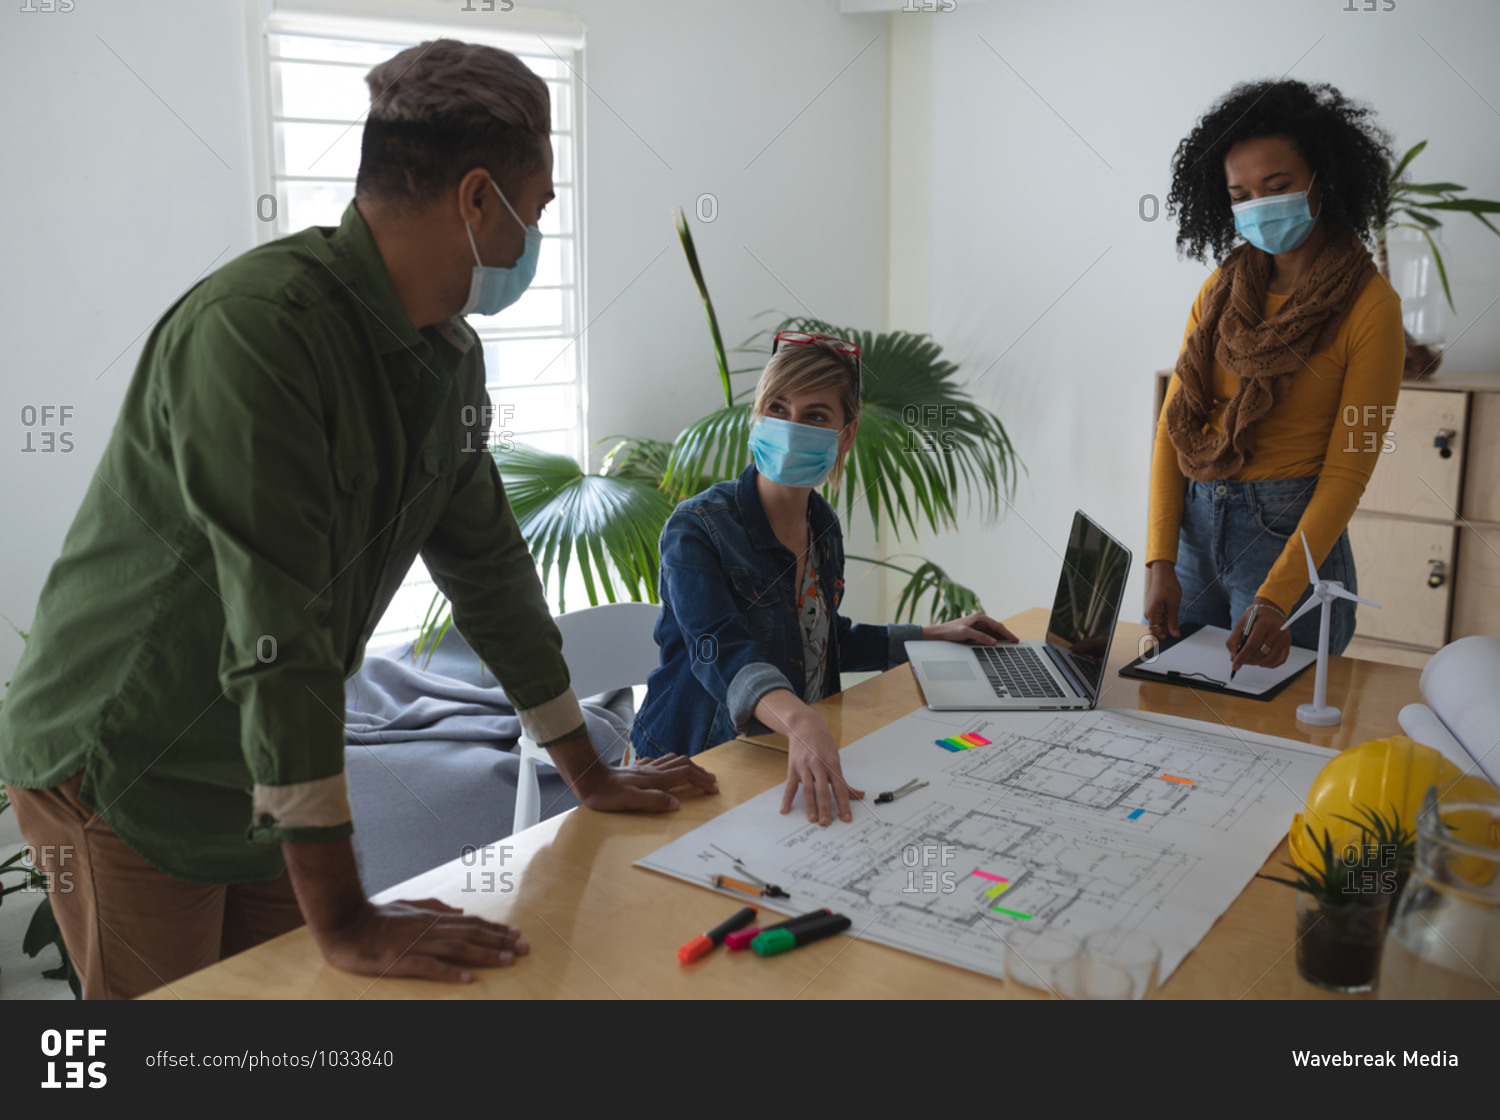 Multi ethnic group of male and female architects in office wearing face masks, discussing over architectural drawing. Health and hygiene in workplace during Coronavirus Covid 19 pandemic.